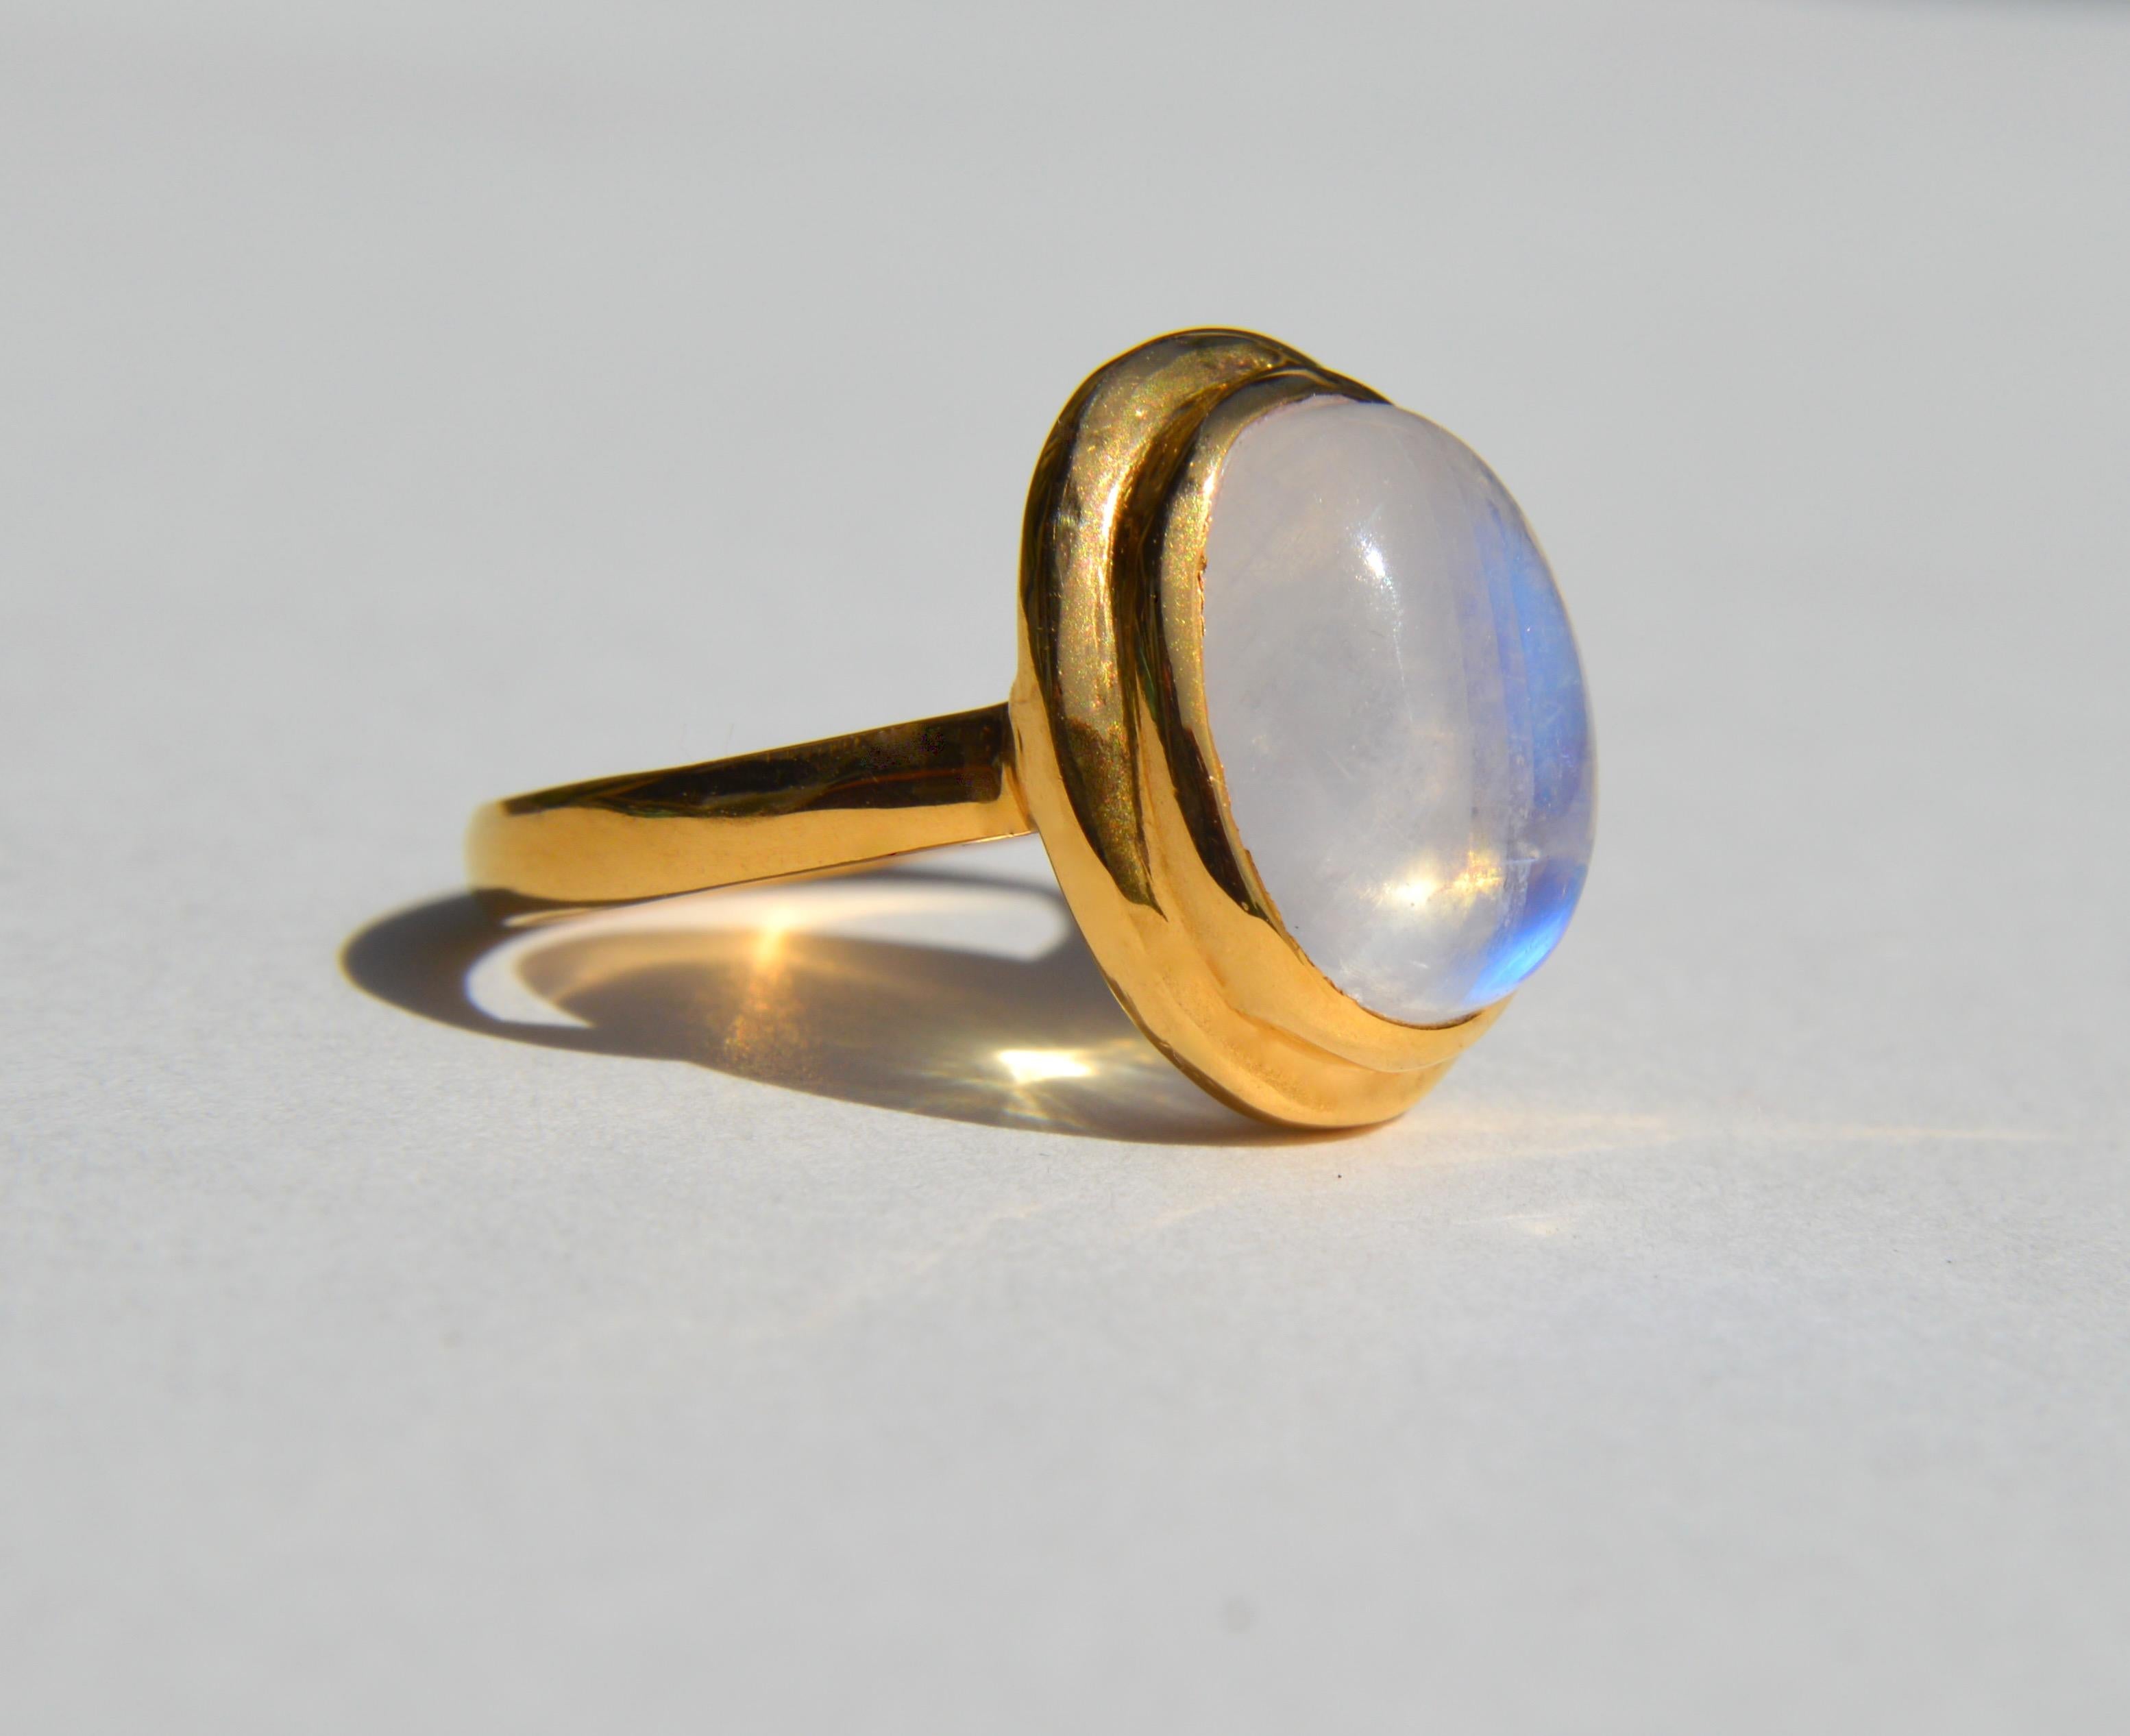 Beautiful vintage circa 1960s vintage 5.7 carat rainbow moonstone cabochon ring in 14K yellow gold. Ring is in very good condition. Stone measures 13x10mm. Marked as 14K gold. Size 7, can be resized by a jeweler. Would be lovely as an alternative